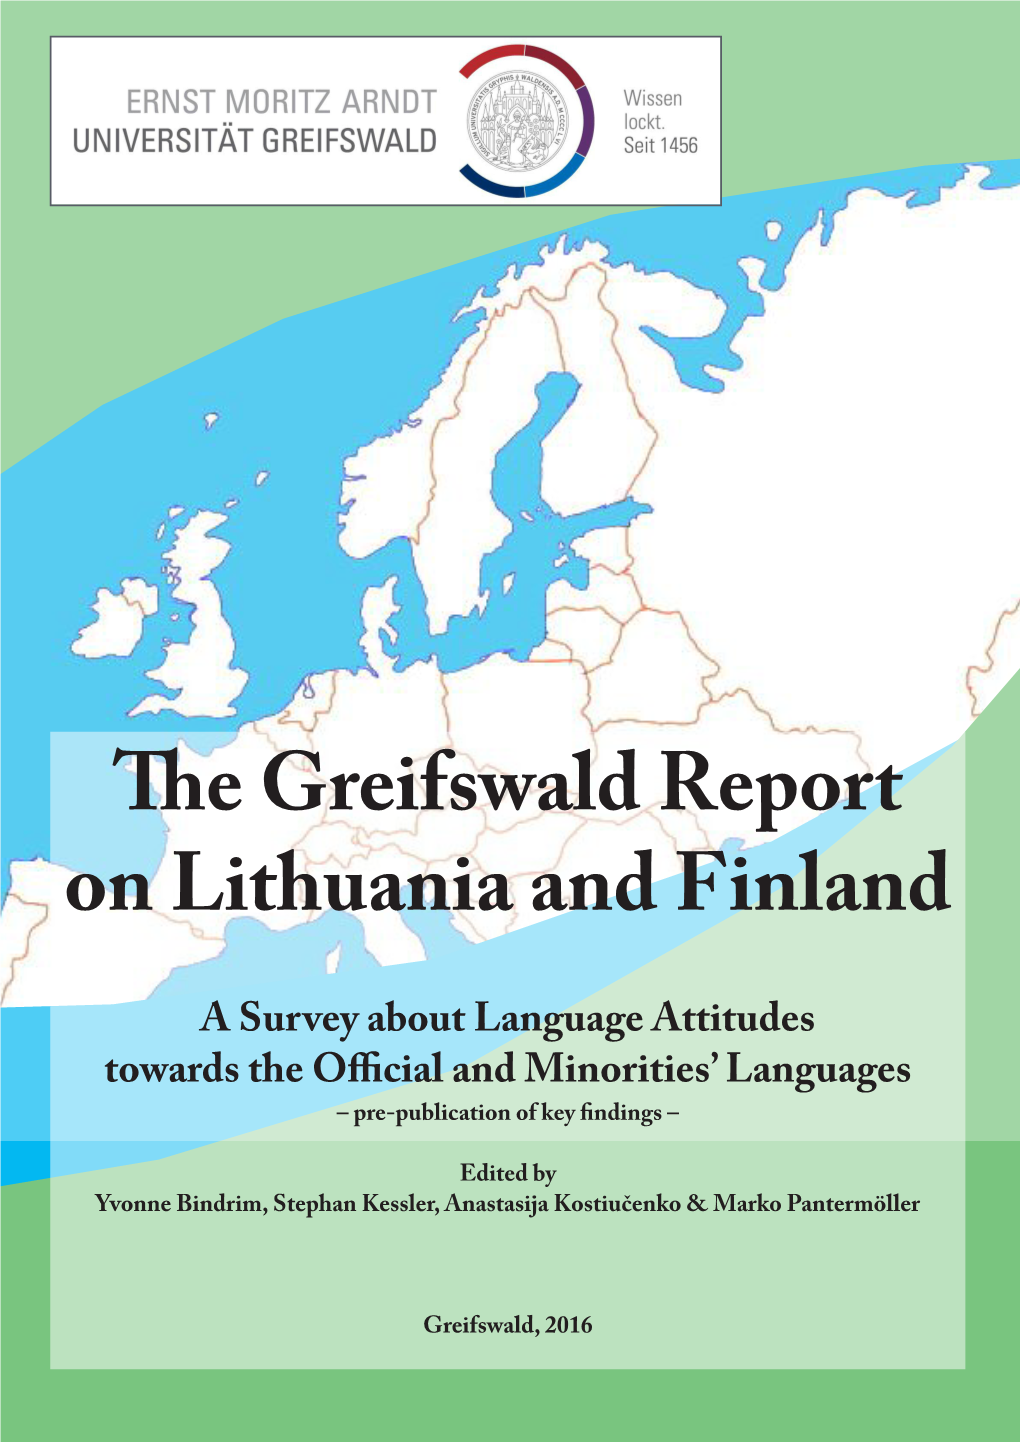 The Greifswald Report on Lithuania and Finland